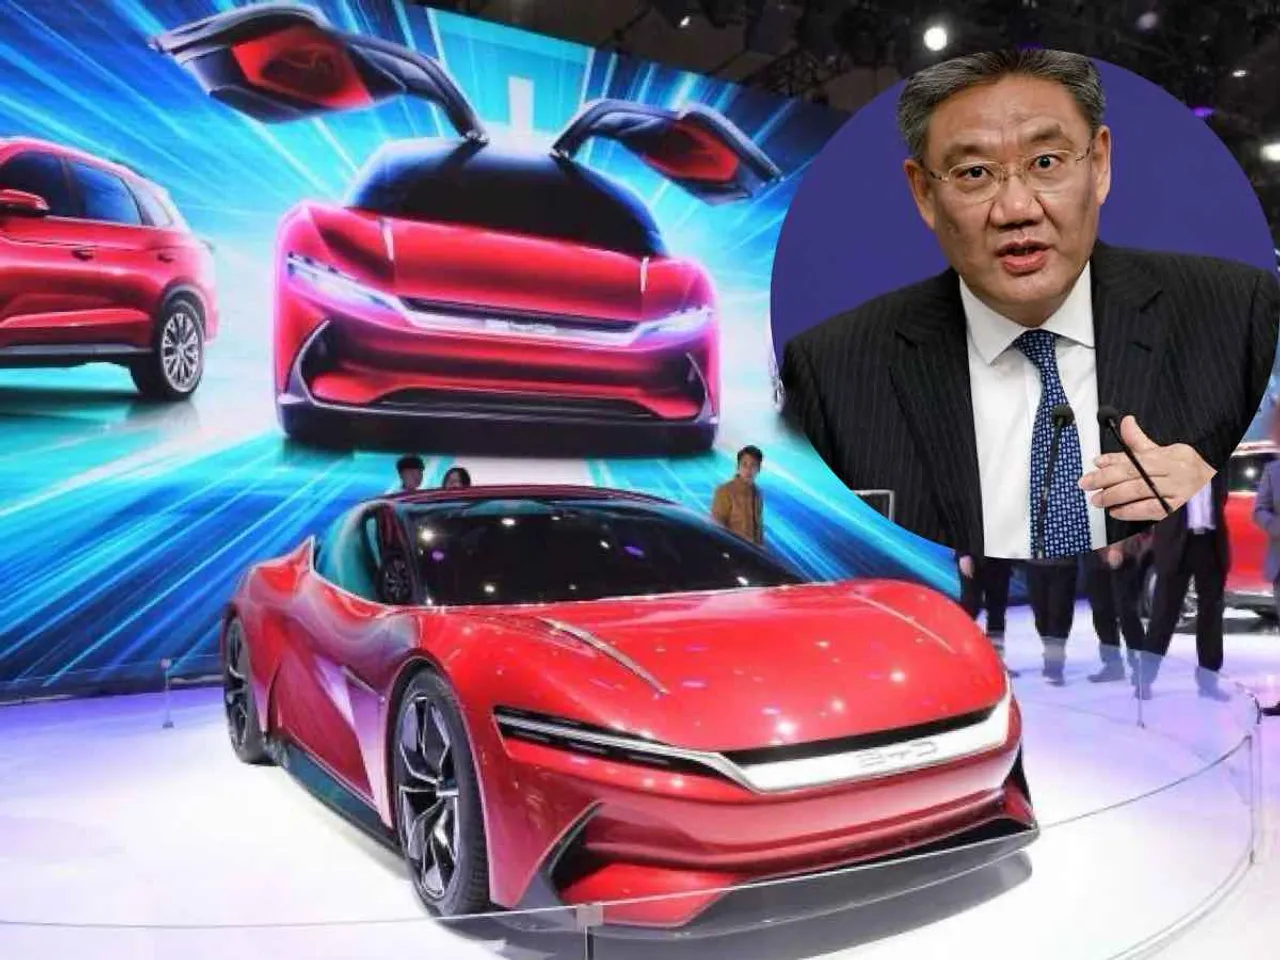 BYD, Chinese EV Car with the image of Wang Wentao, Ministry of Trade China